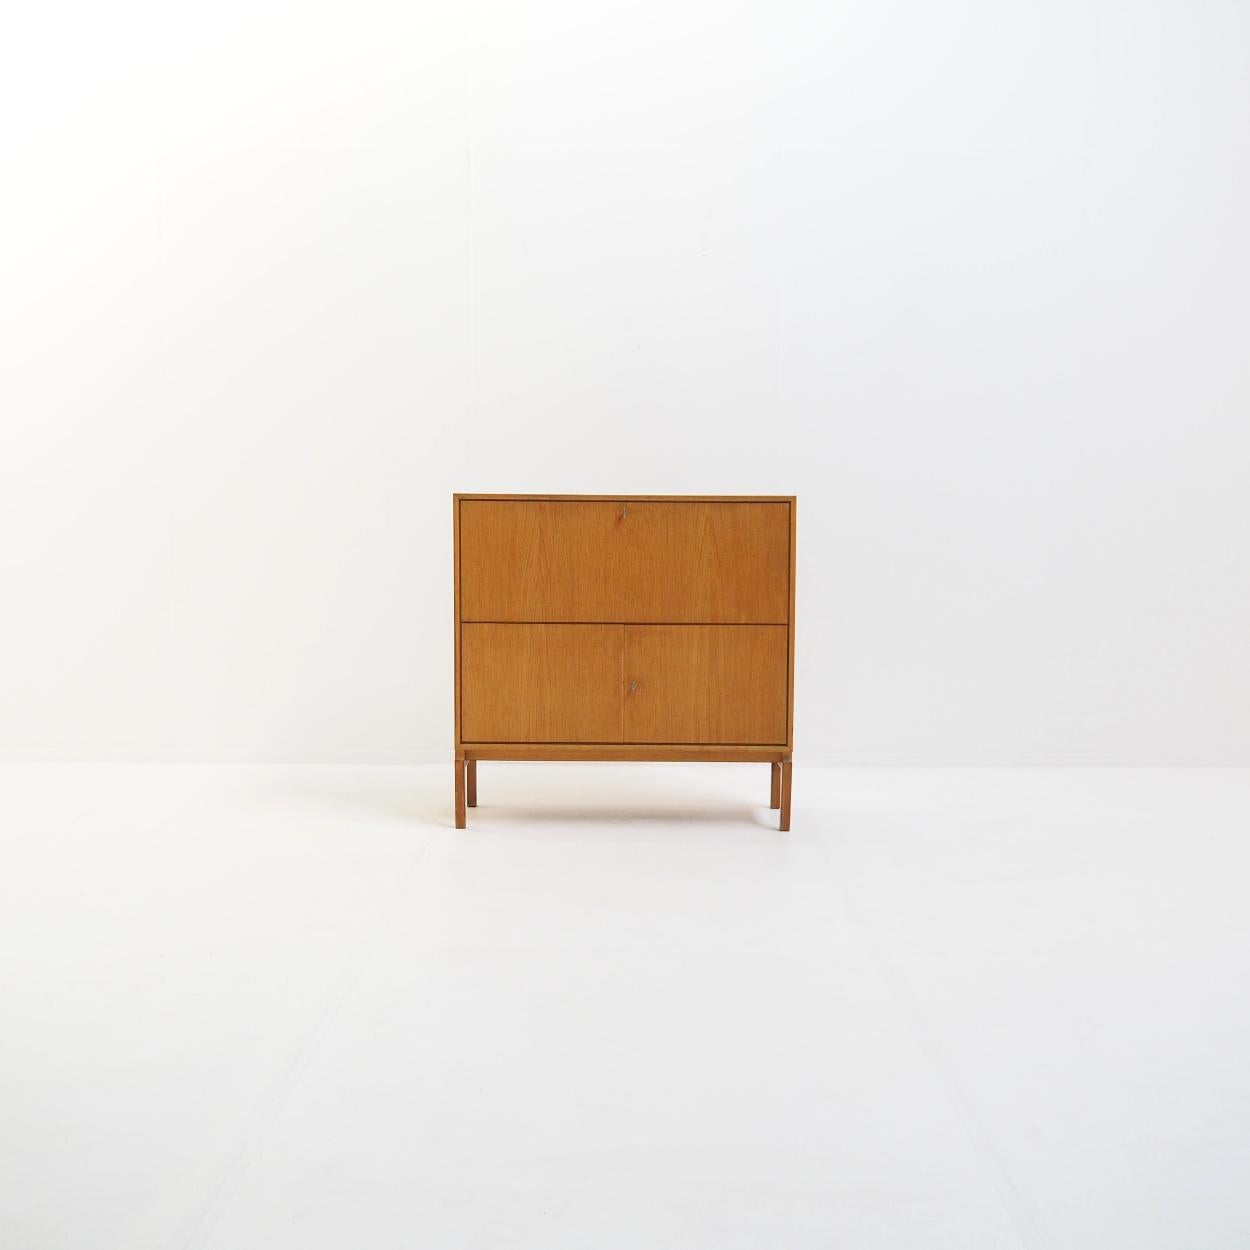 Beautiful IKEA cabinet that was initially designed as a wedding gift for Ingvar Kamprad, the founder of IKEA.

The cabinet is made of natural oak veneer with all edges in full oak, which limits the damage. The cabinet has acquired a beautiful warm